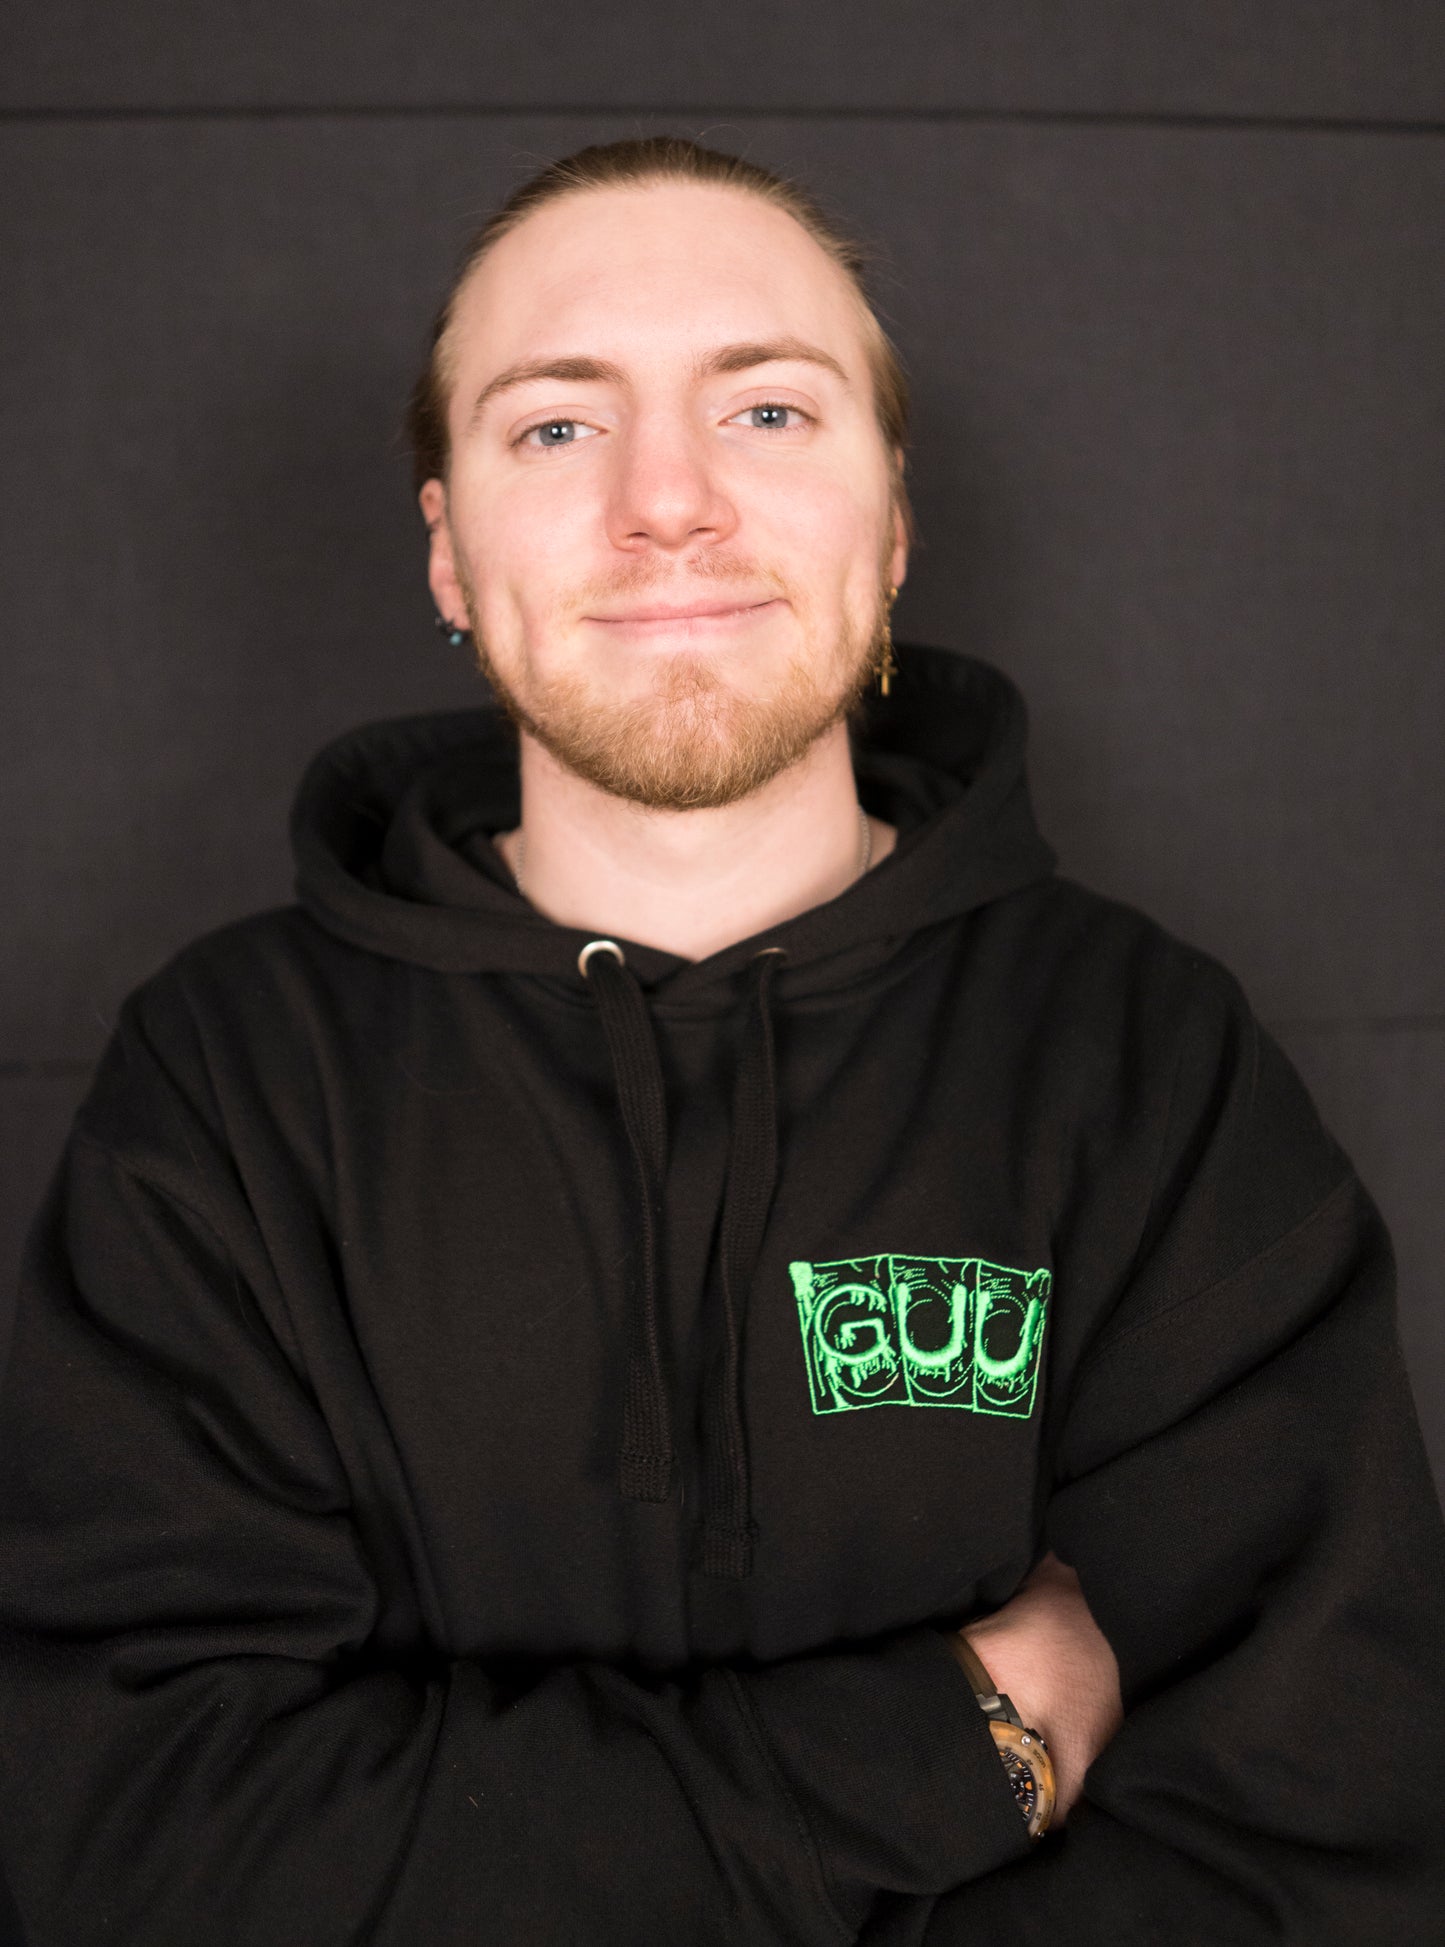 Embroidered Hoodie – Get Guud Merch